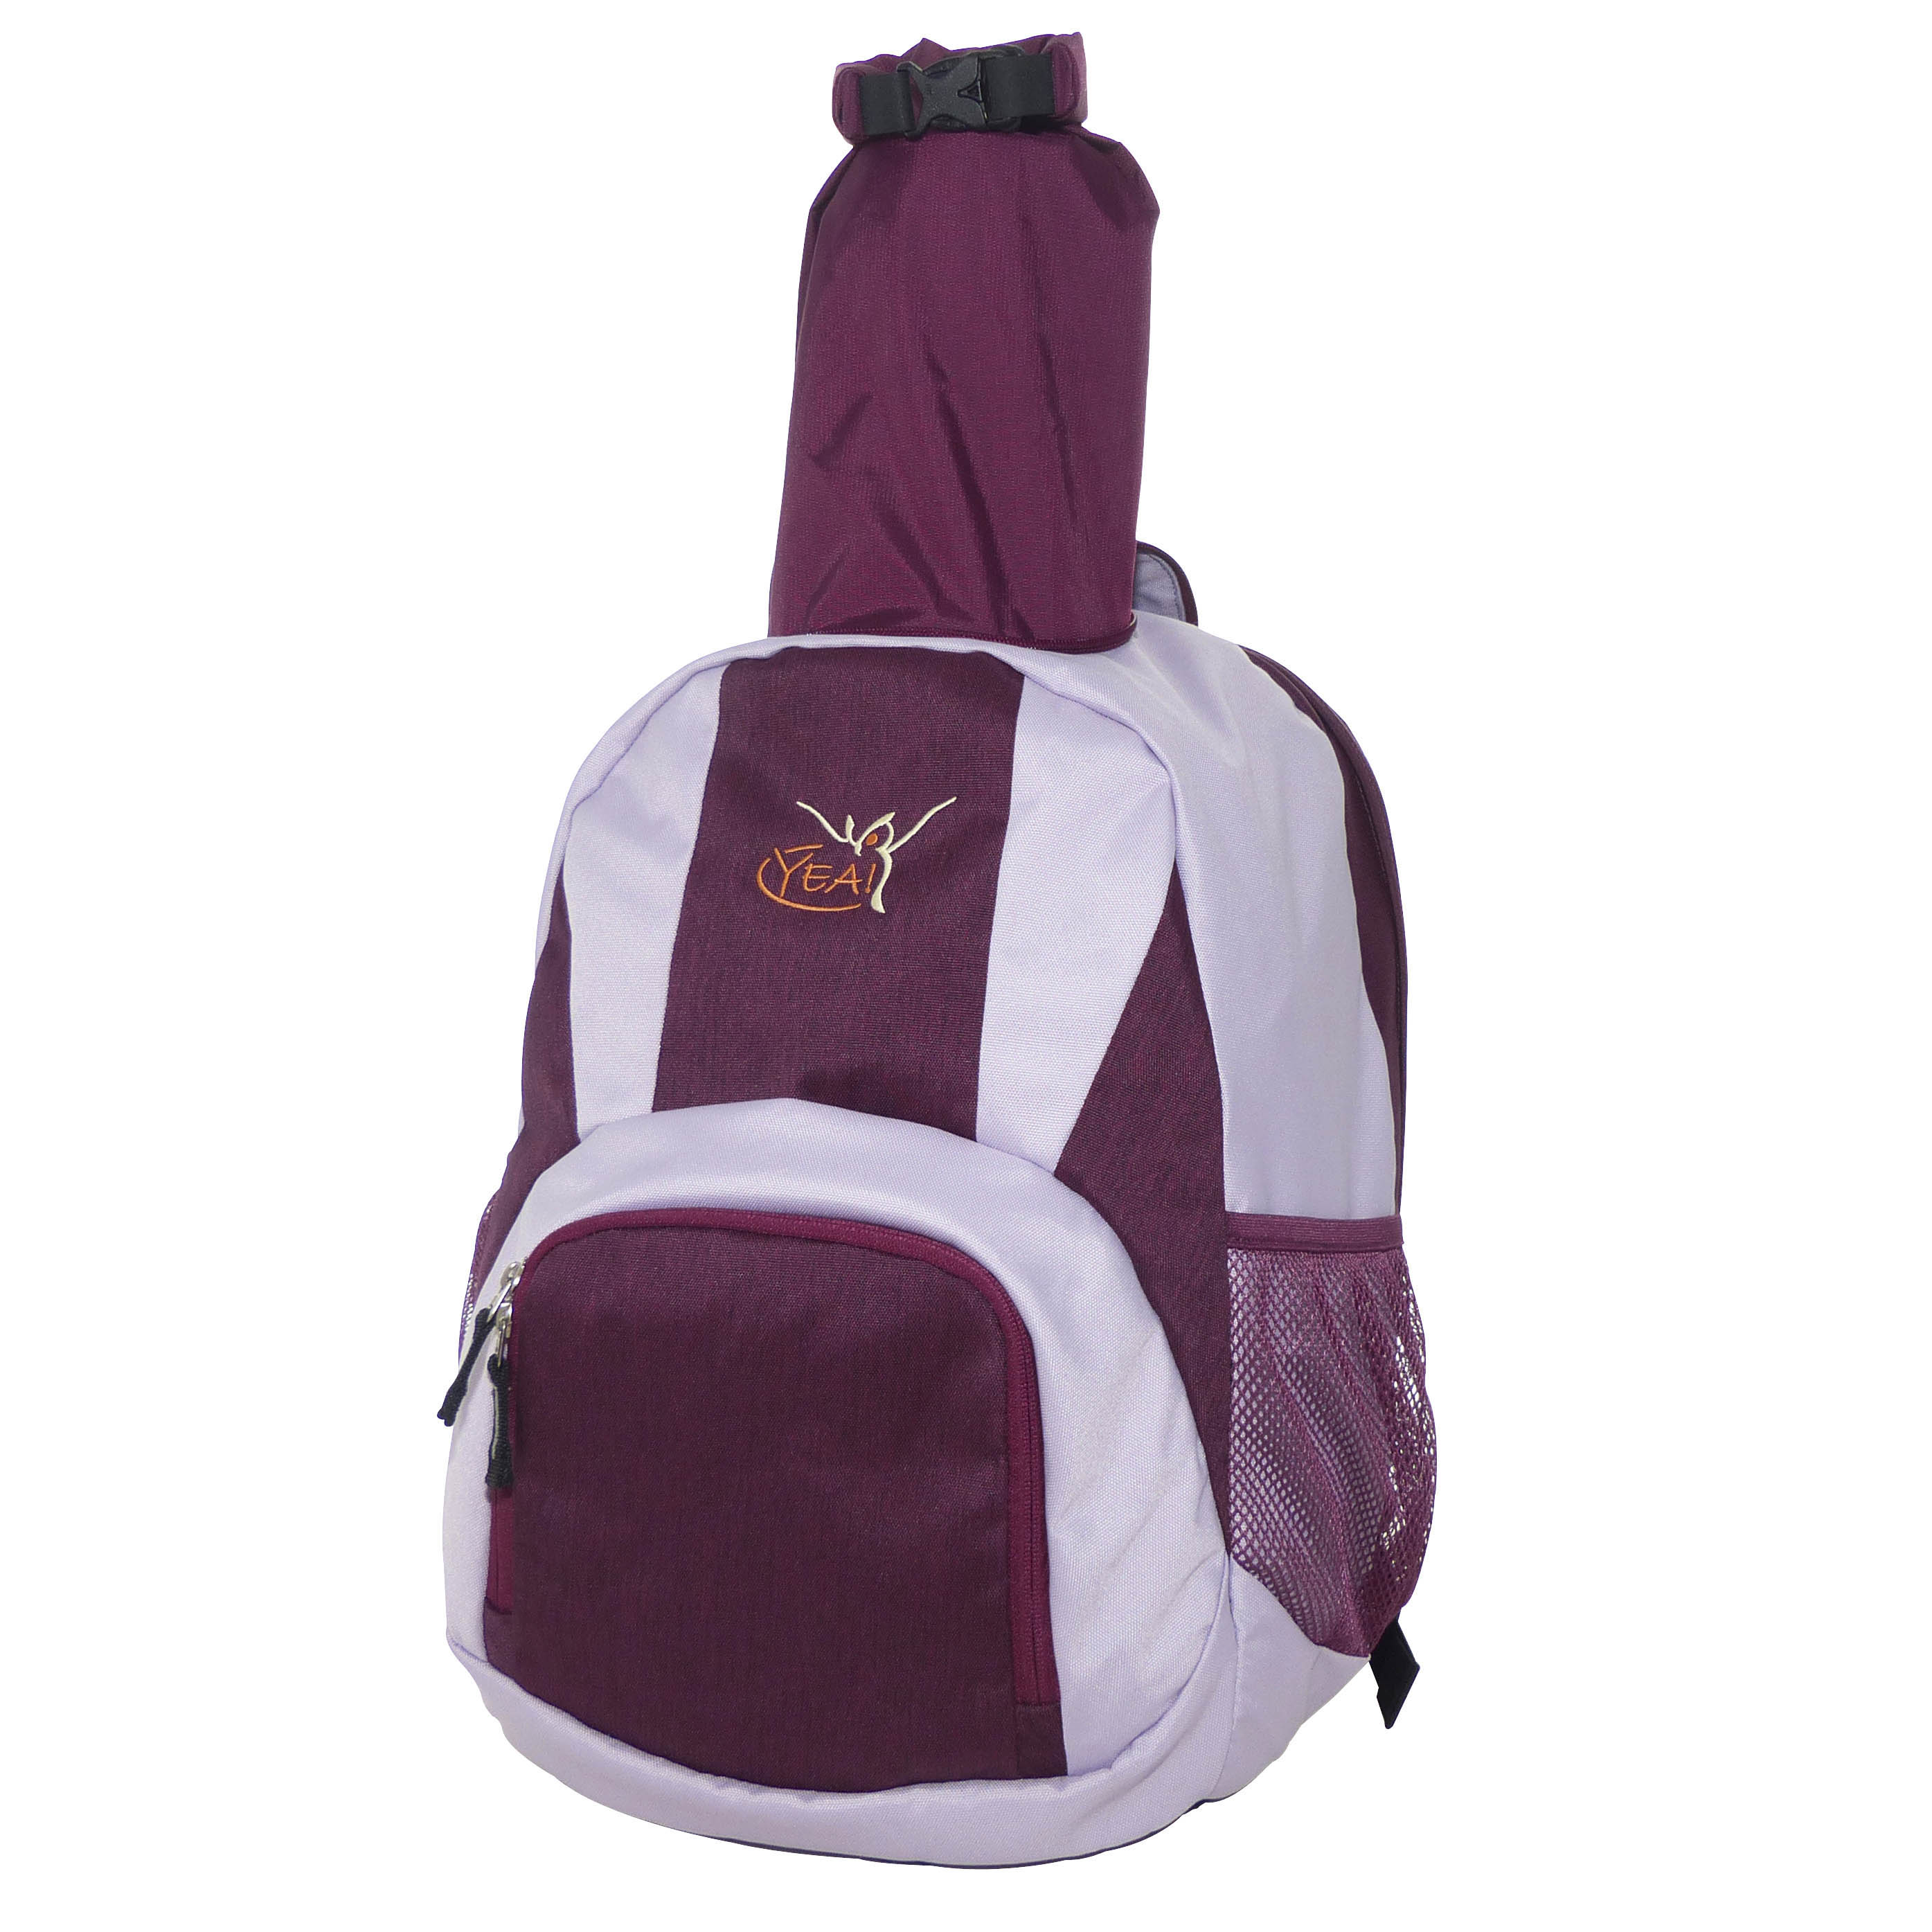 https://www.yogishop.com/out/pictures/master/product/1/yoga-rucksack-elderberry-front1.jpg